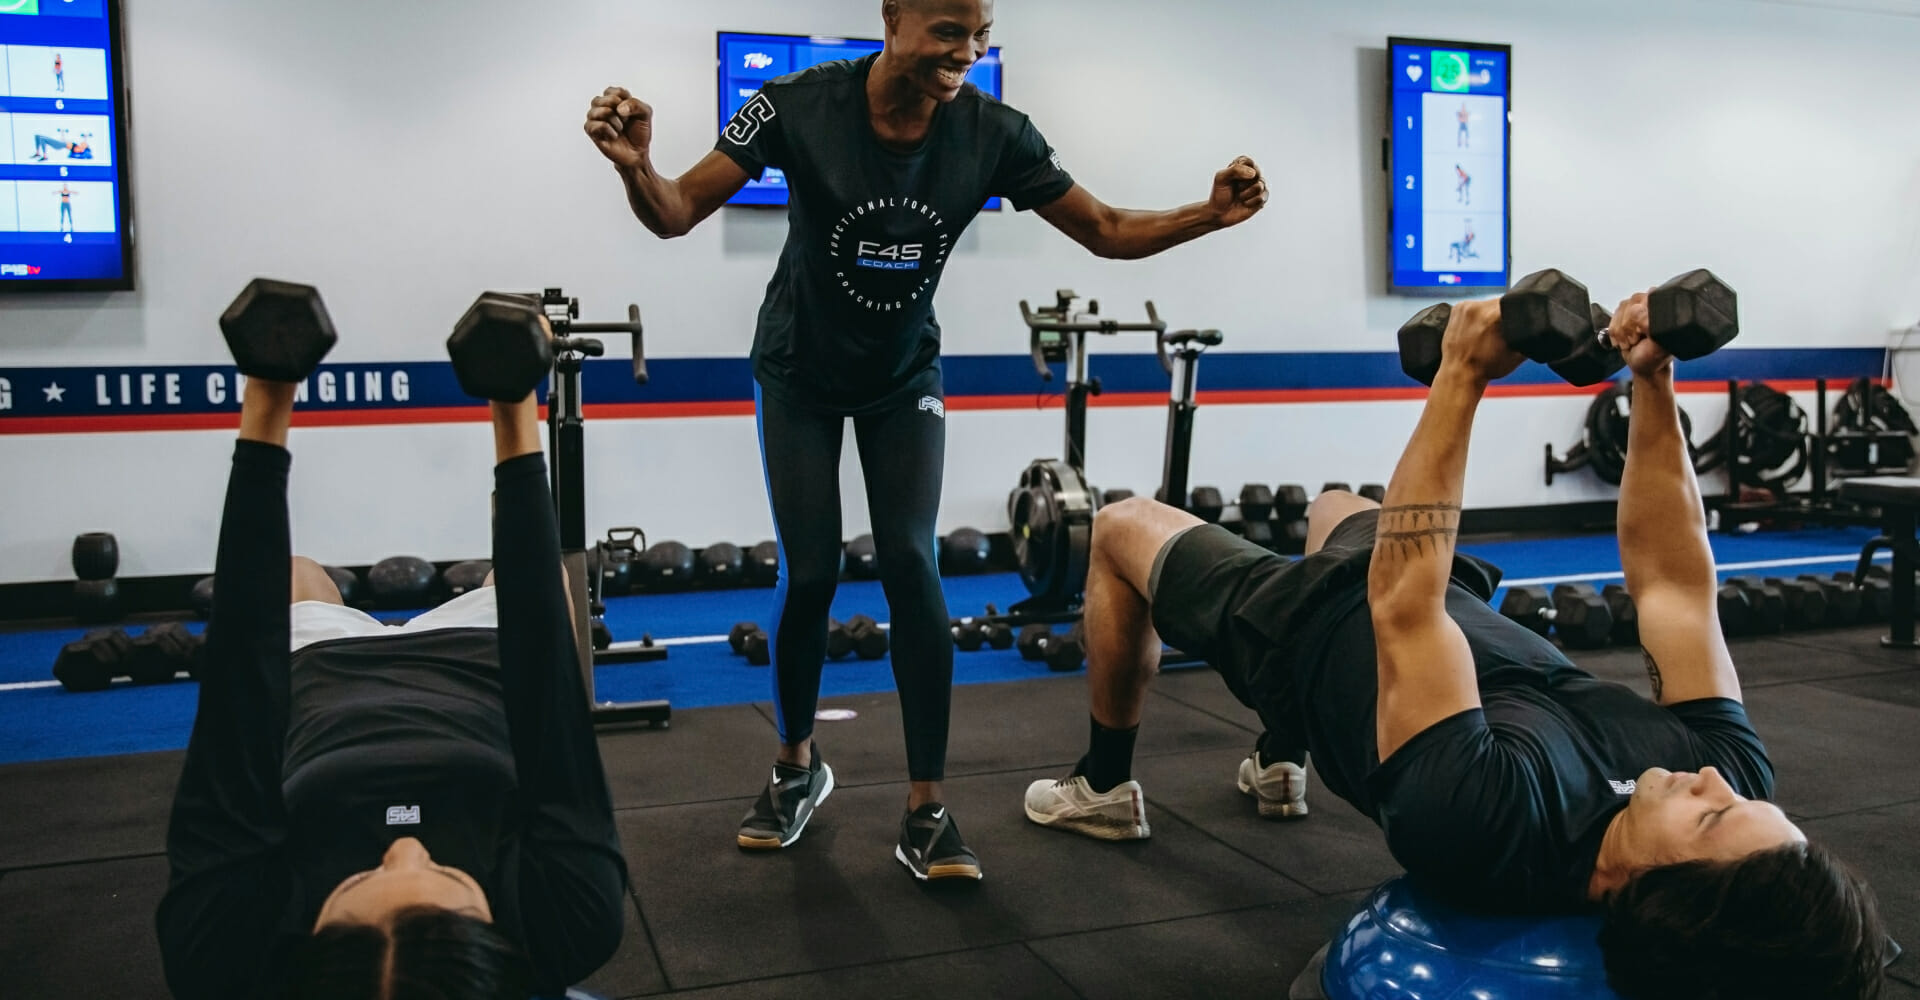 How the F45 Training brand hits all the right marks according to